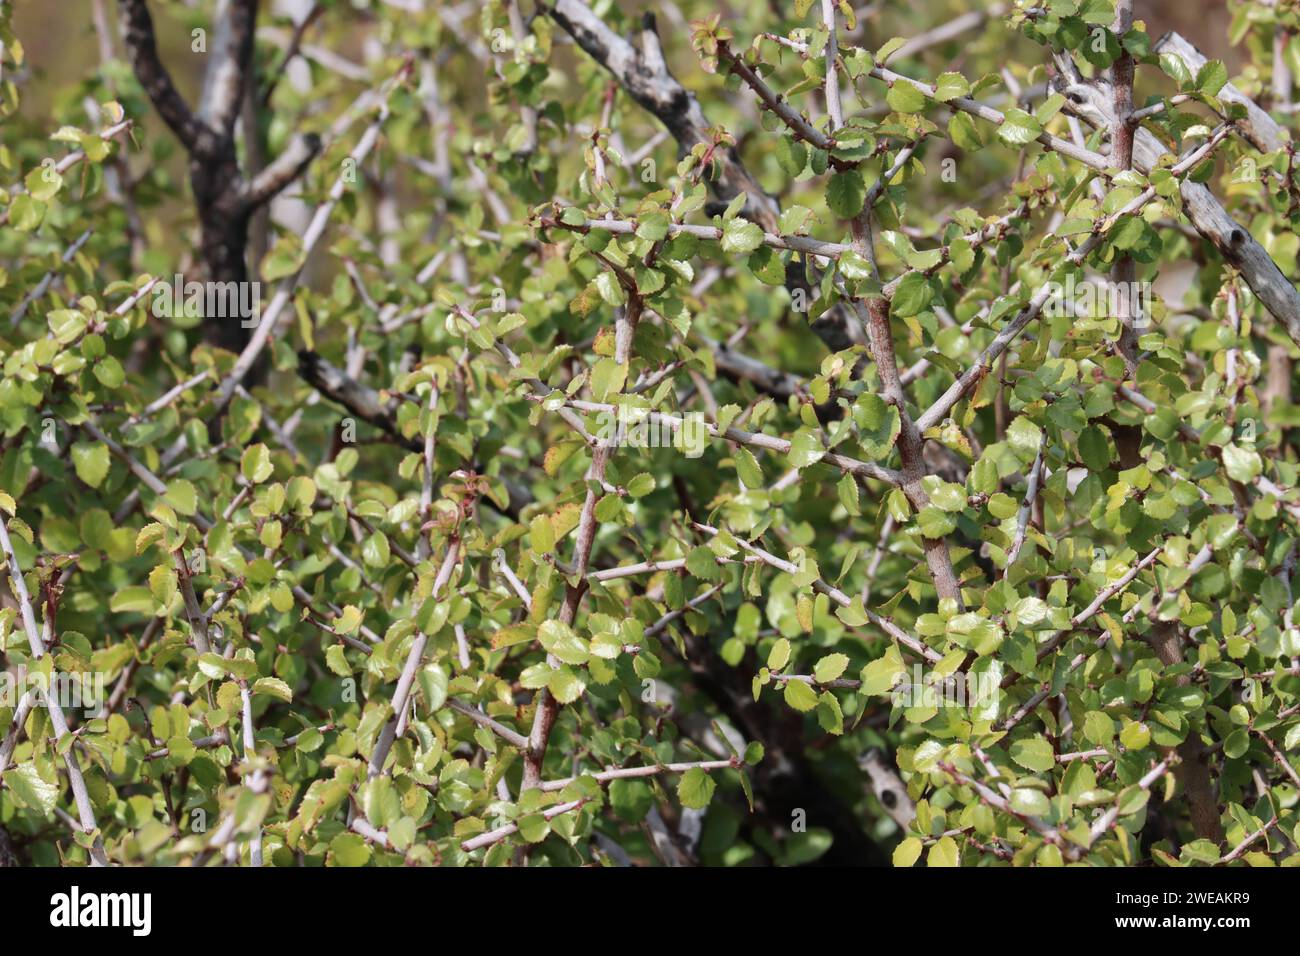 Spiny Redberry, Rhamnus Crocea, a native polygamodioecious shrub displaying elliptically obovate leaves during Winter in the Santa Ana Mountains. Stock Photo